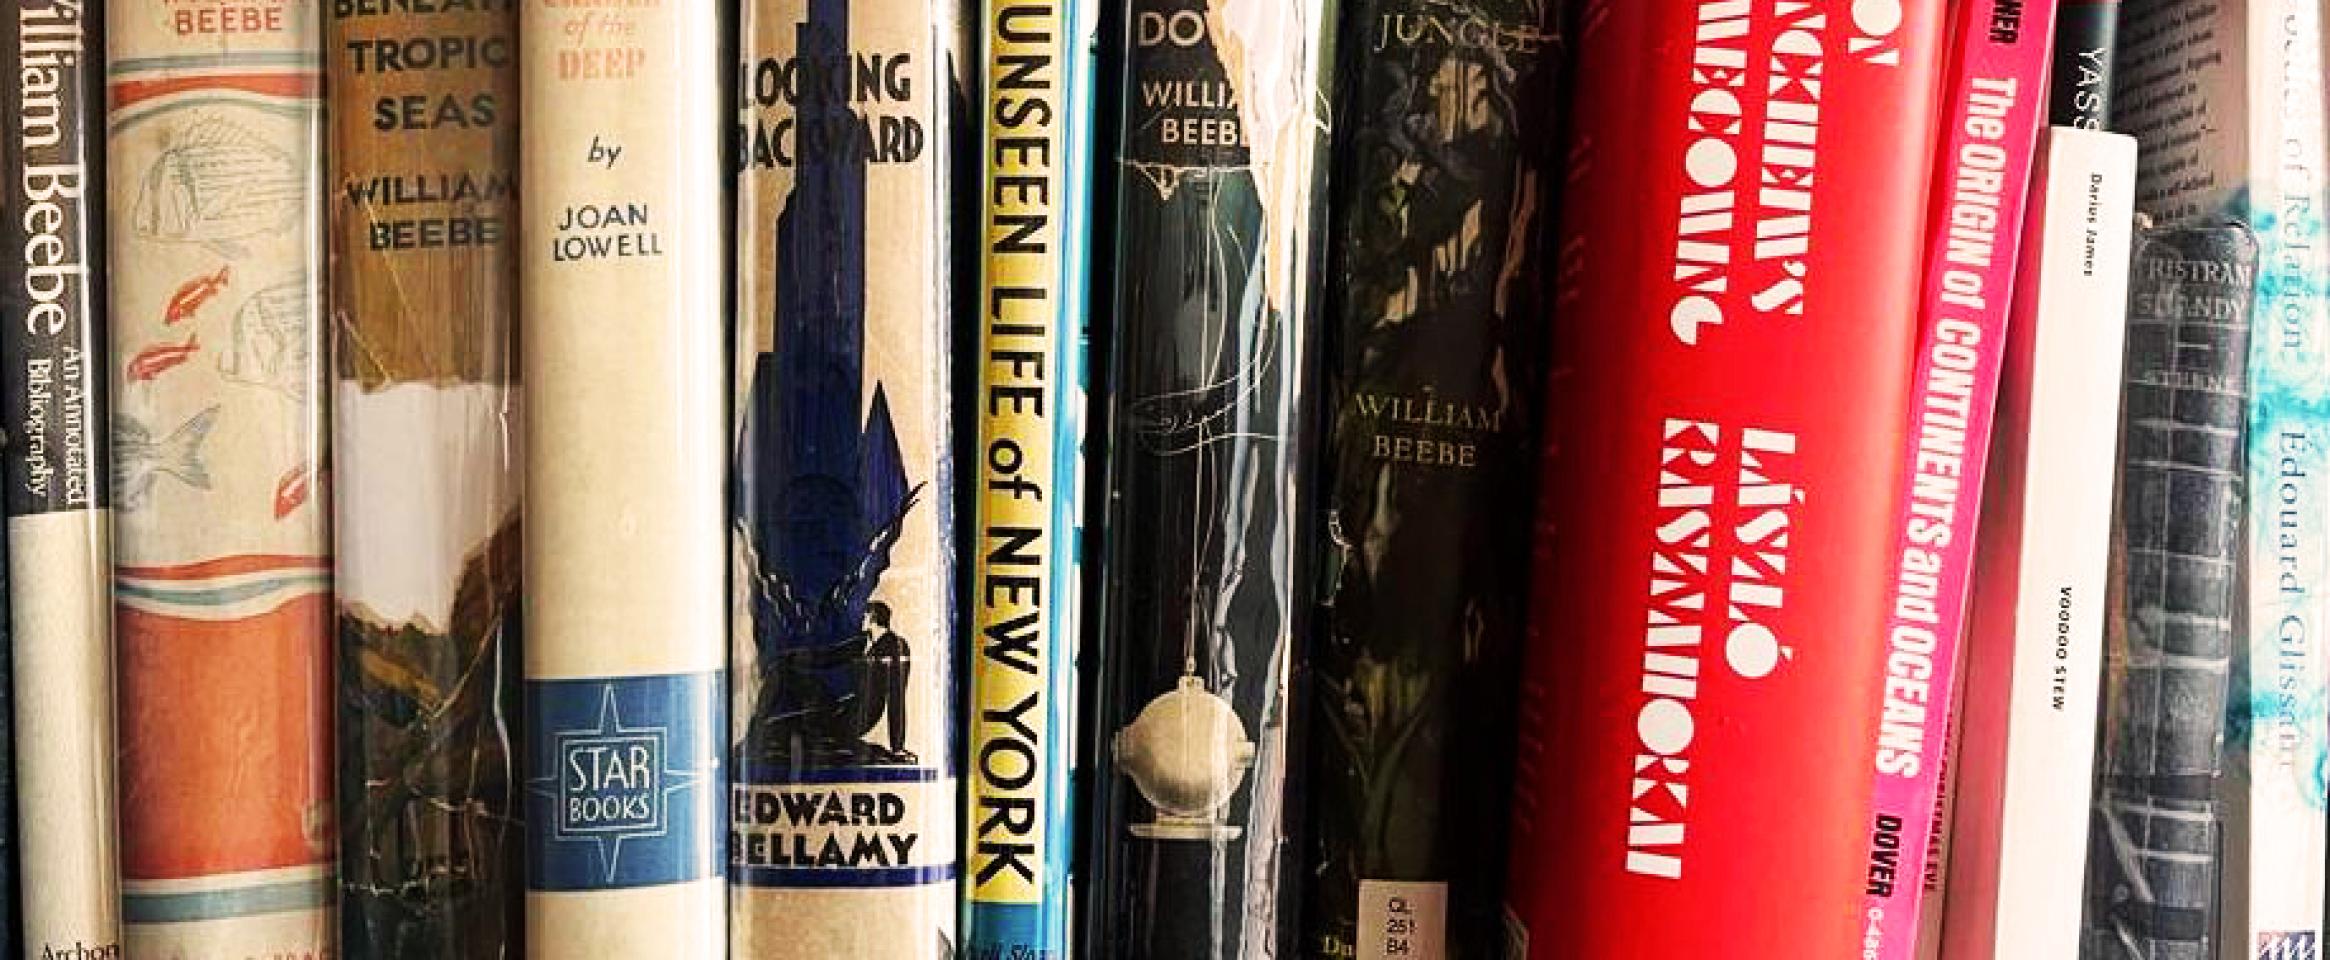 Horizontal photo of a bookshelf of Brad Fox, featuring many old titles by William Beebe